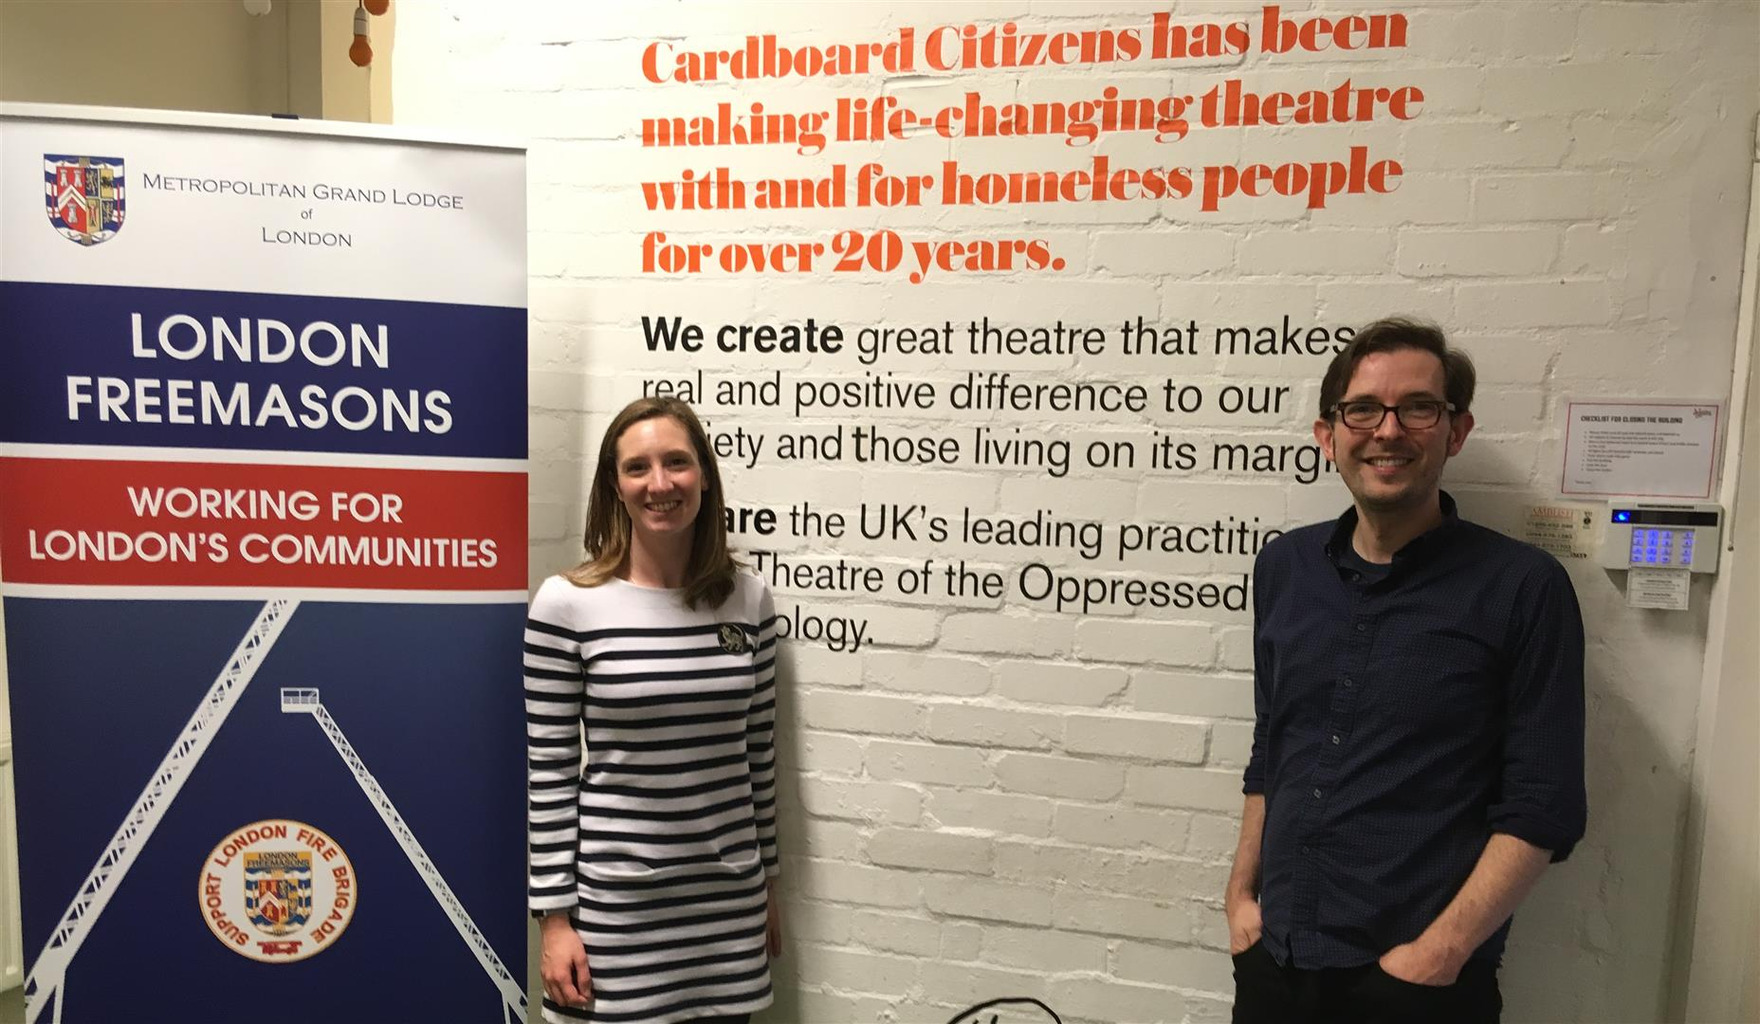 Cardboard Citizens Charity receives boost thanks to London Freemasons